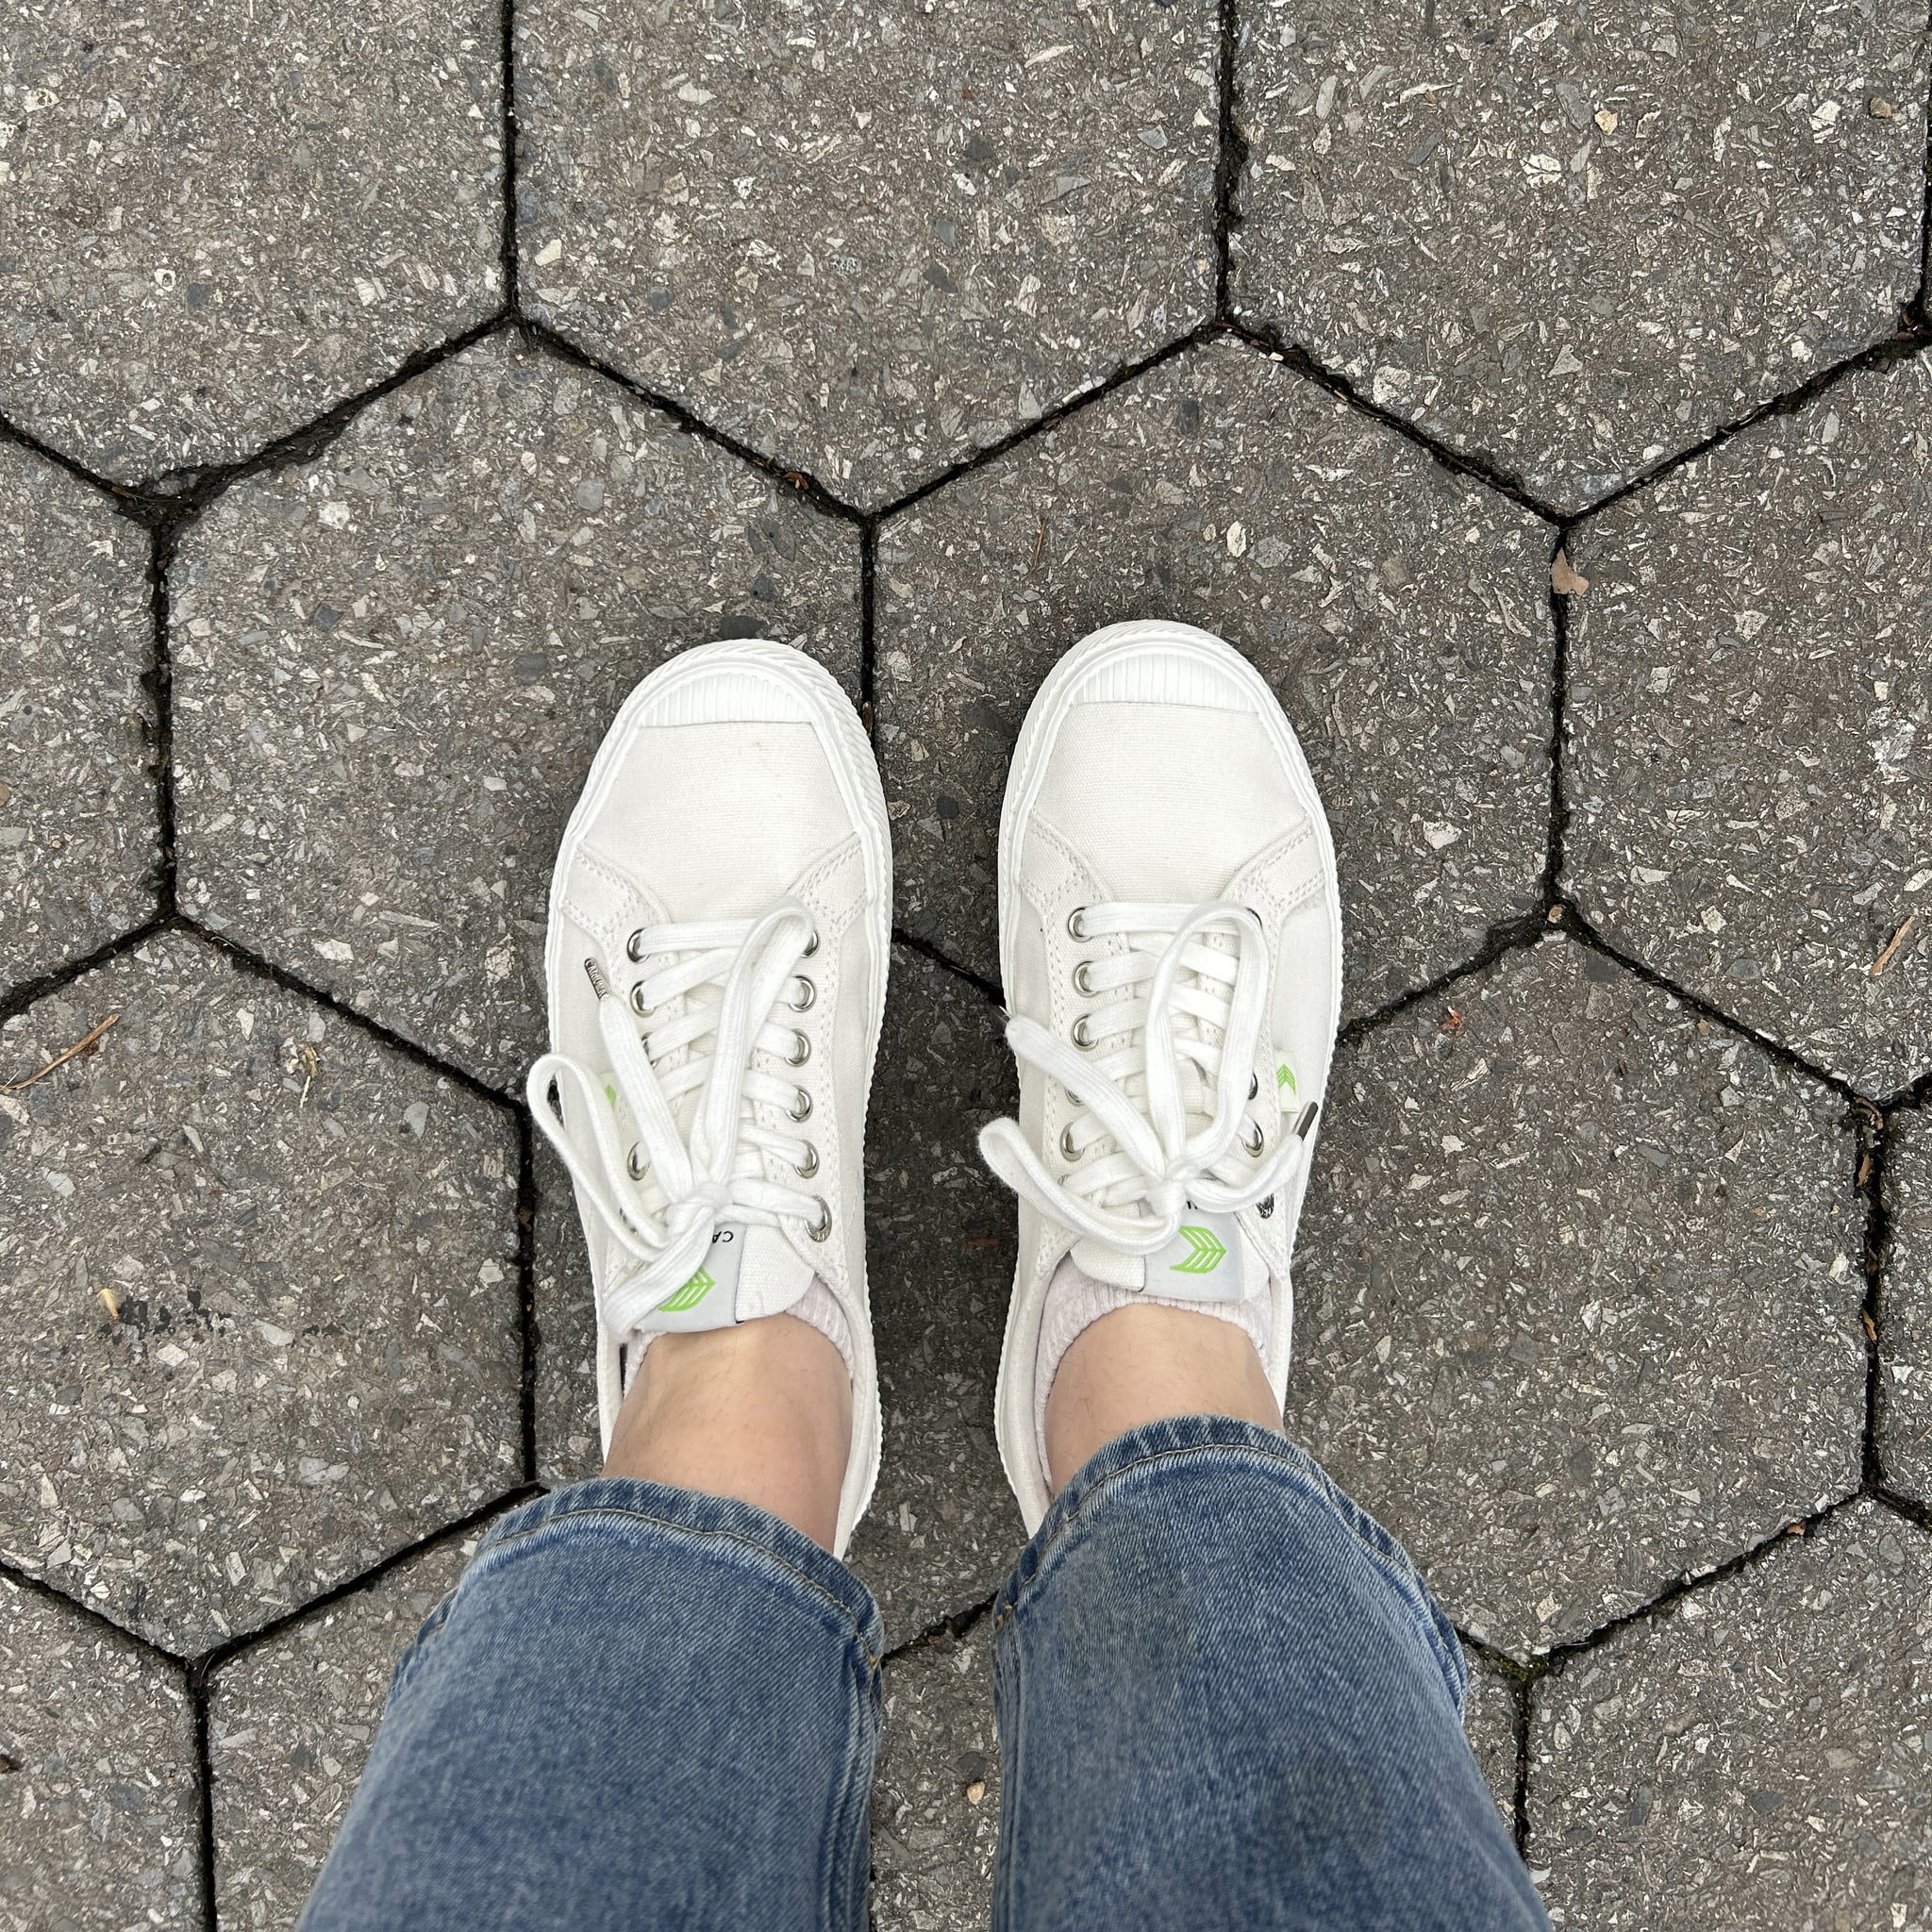 These Canvas Low-Top Sneakers Have Become My Go-To for Running Errands